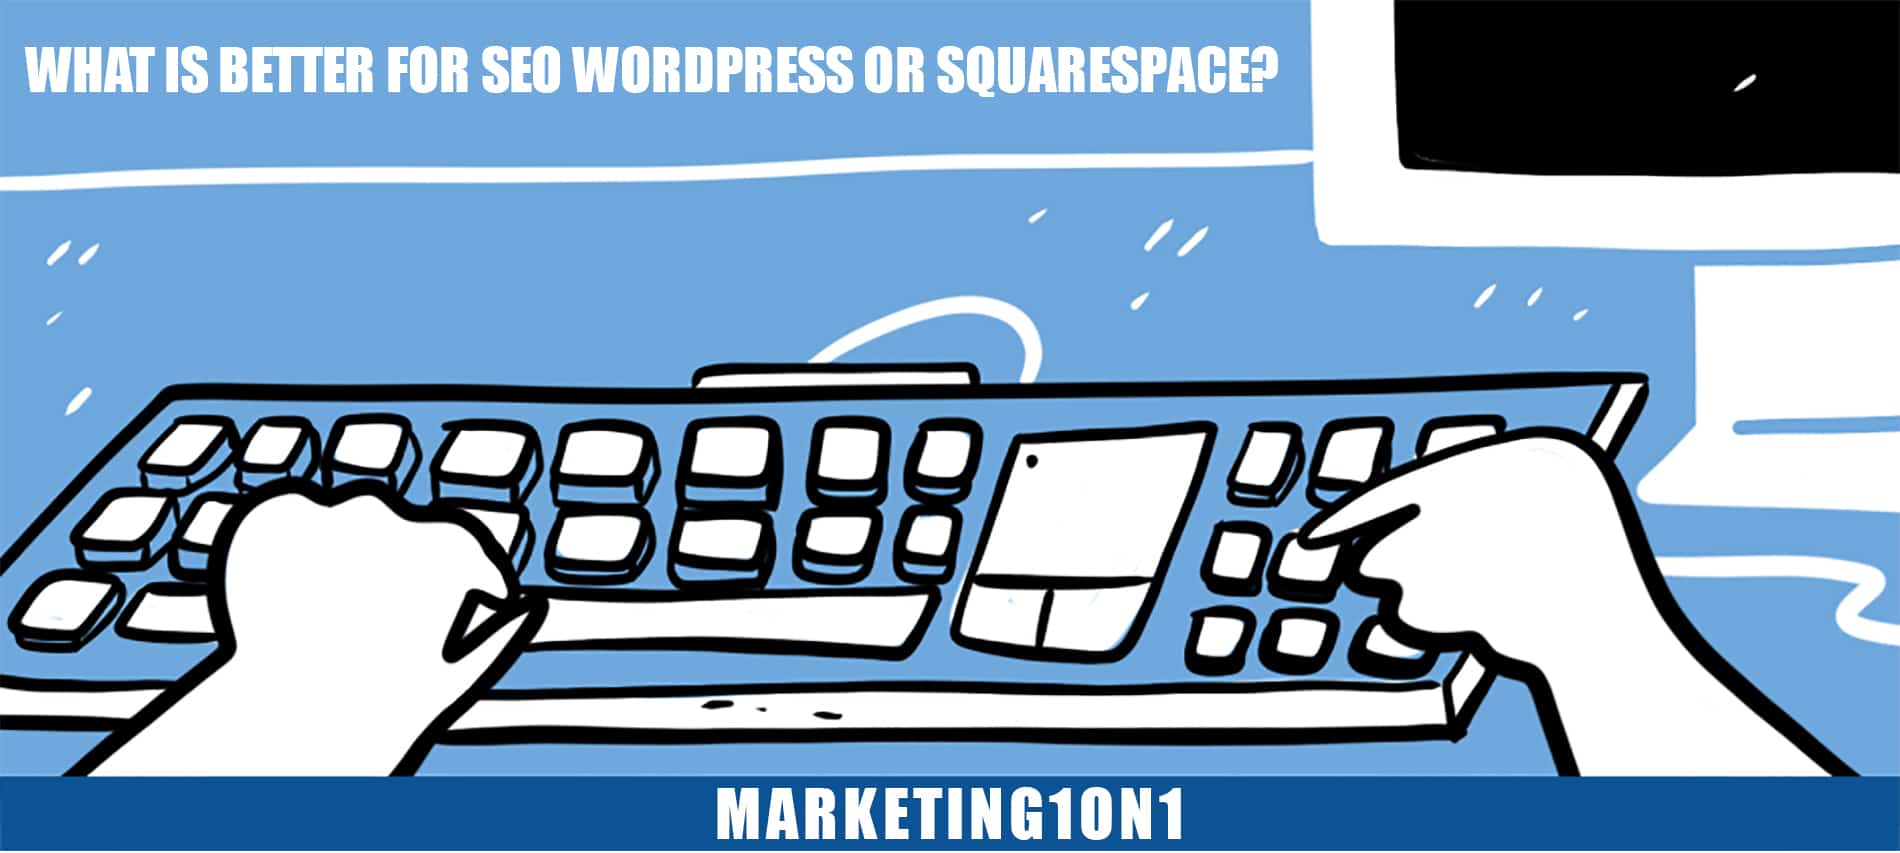 What is better for SEO WordPress or Squarespace?